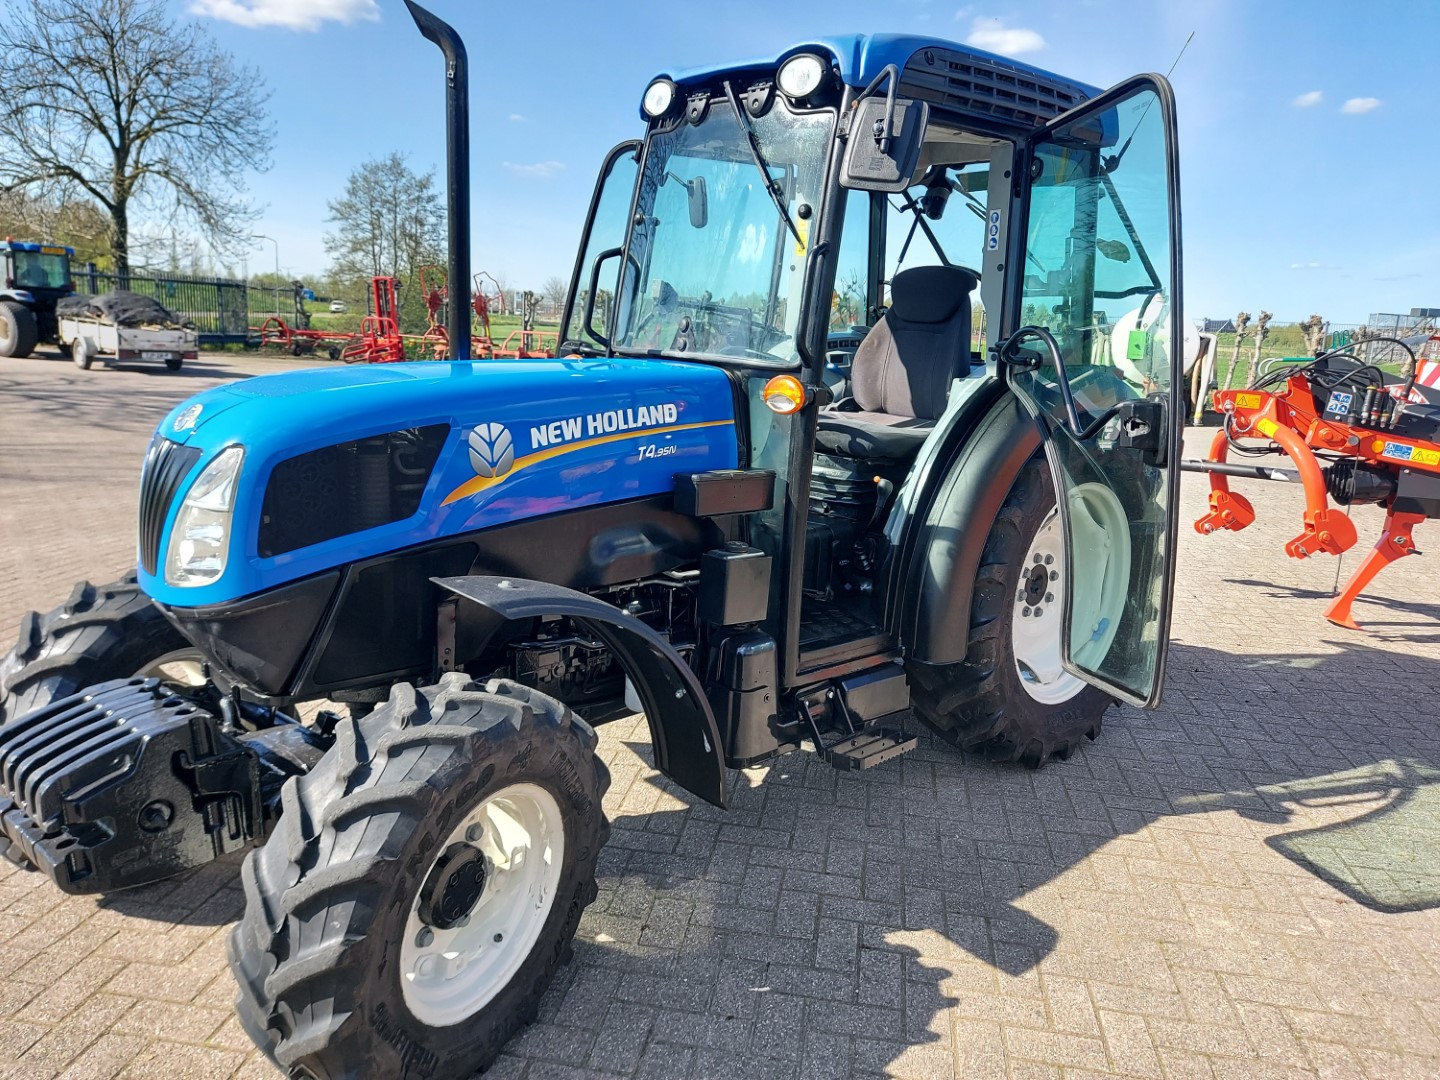 NEW HOLLAND T4.95N 4WD CAB`